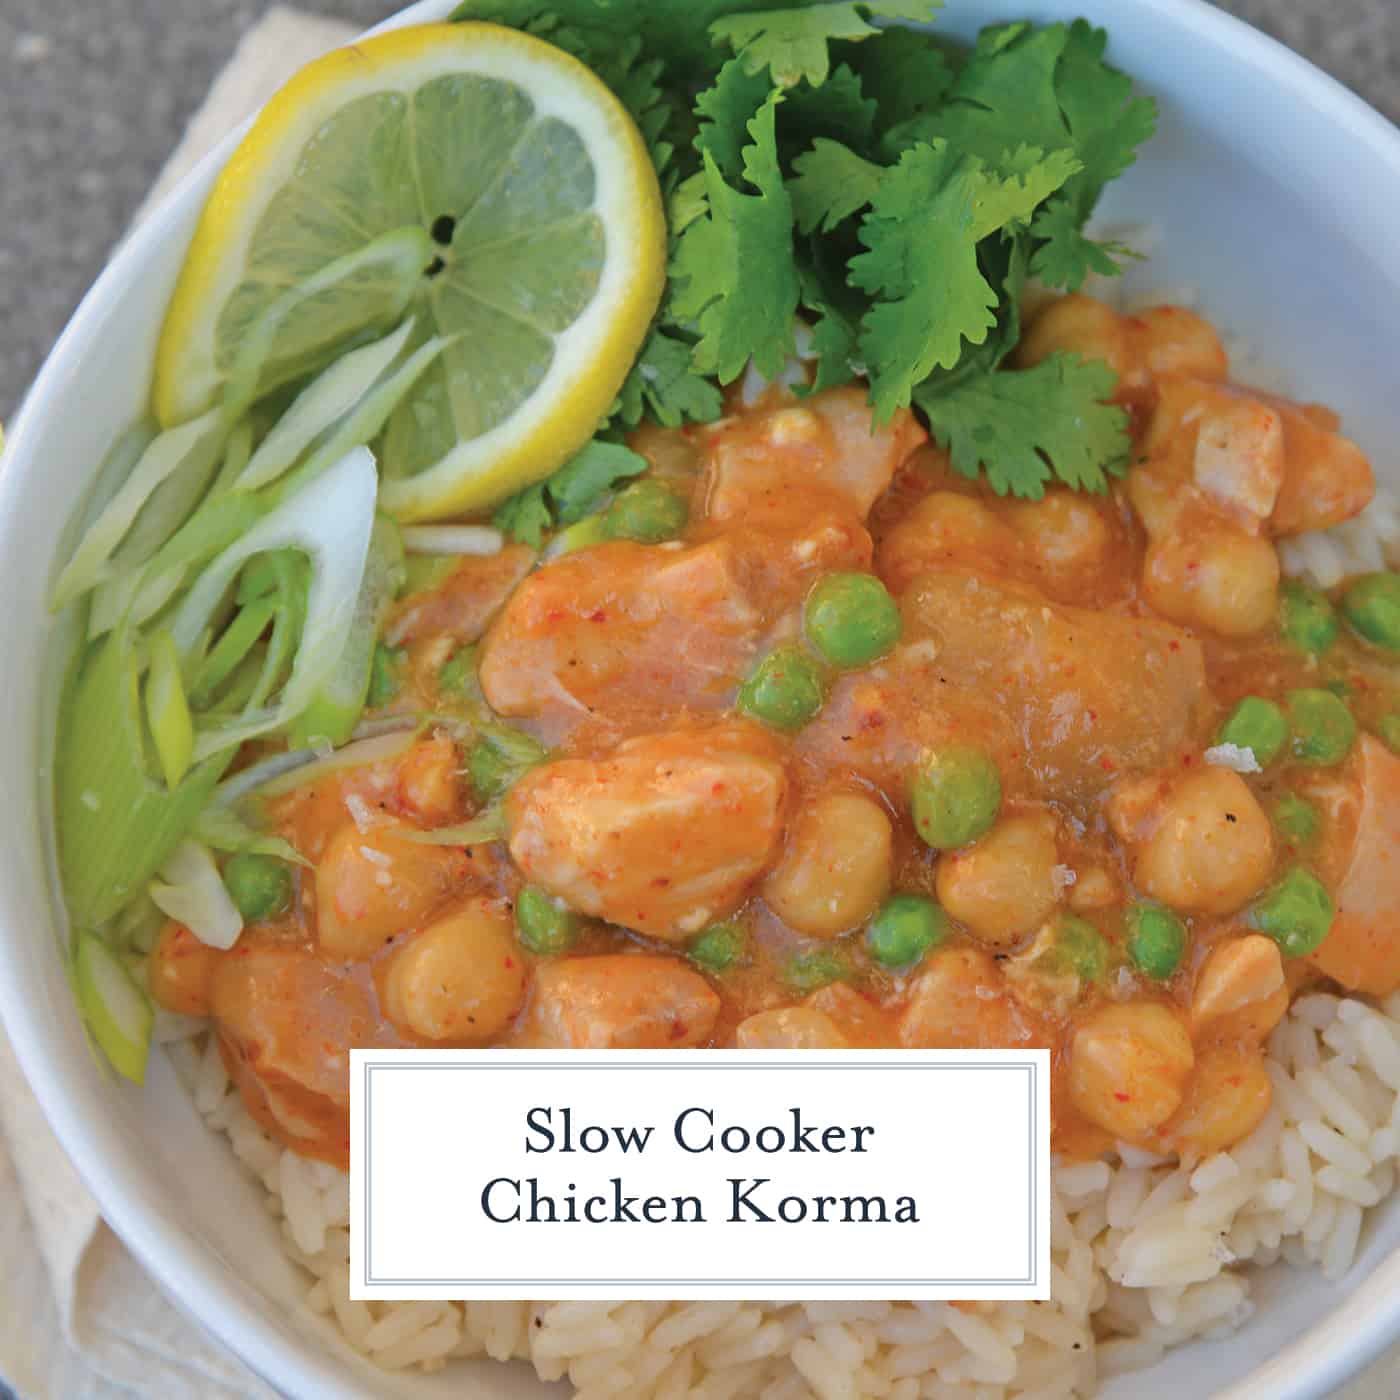 Slow Cooker Chicken Korma is a healthier way to prepare dinner! Only 10 minutes of prep time and into the pot! Loaded with dietary fiber and protein. #chickenkorma #easyindianrecipes #redcurryrecipes www.savoryexperiments.com